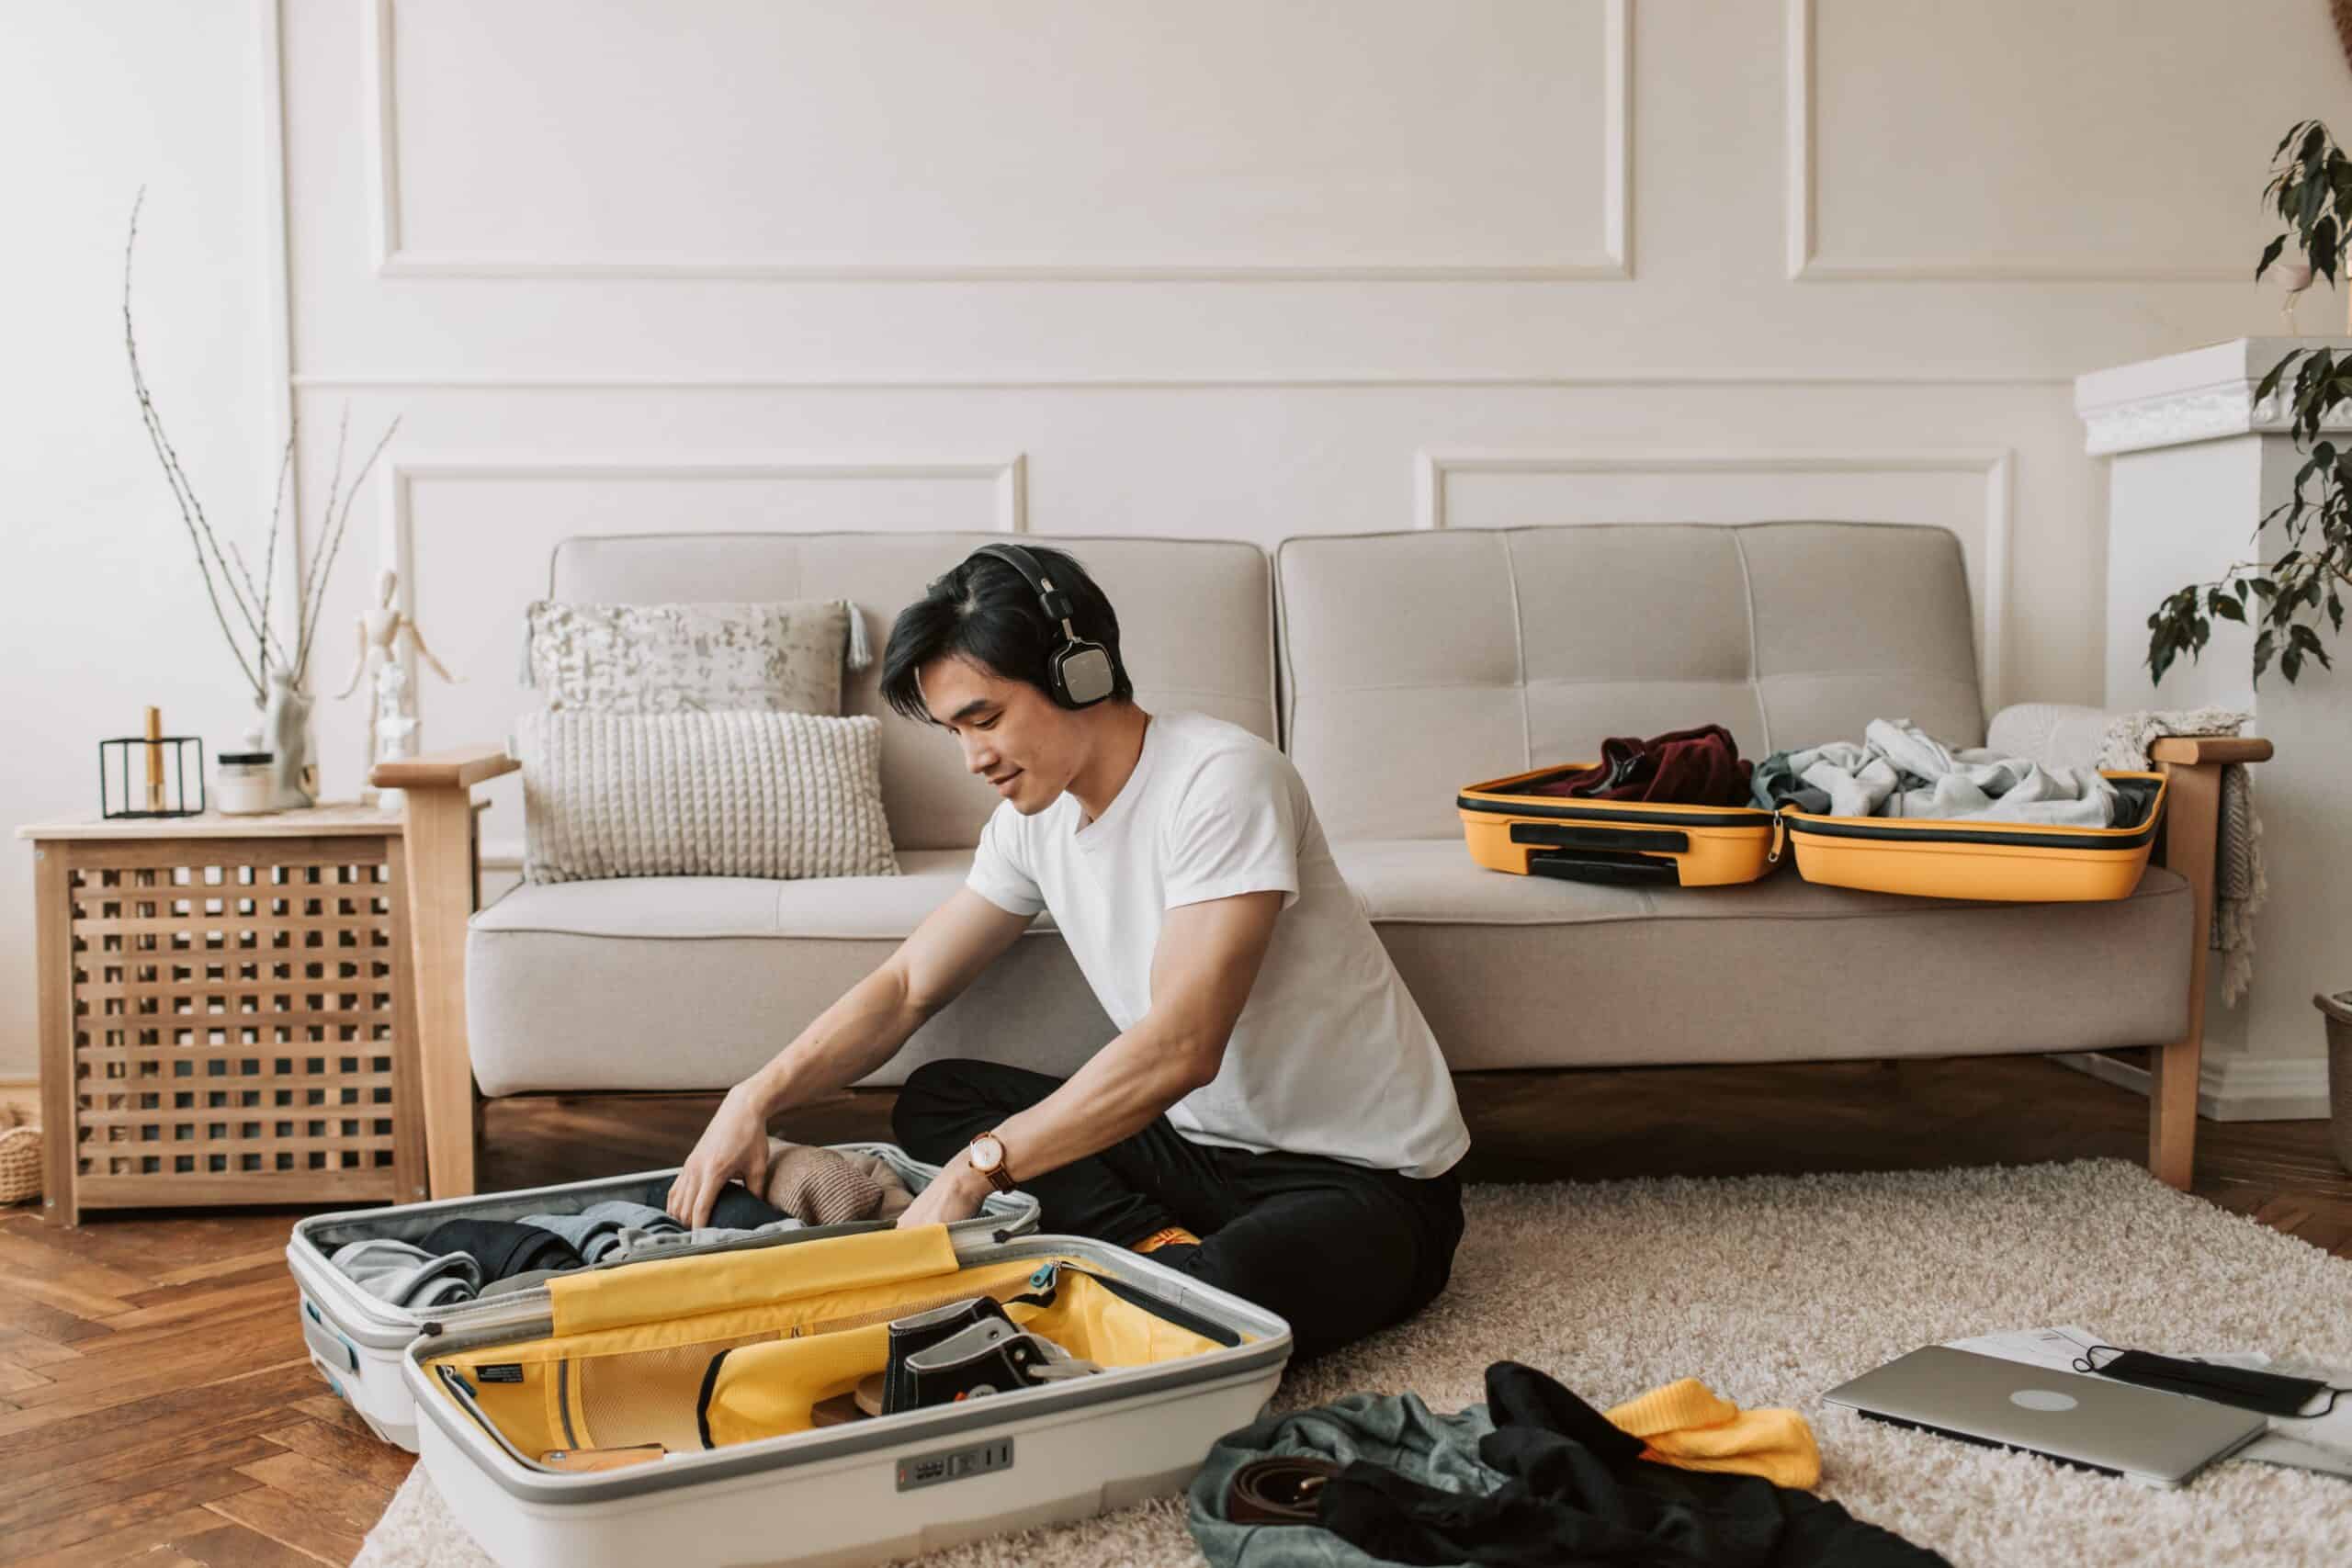 Photo by Vlada Karpovich: https://www.pexels.com/photo/a-man-listening-on-his-headphones-while-packing-his-clothes-7365334/